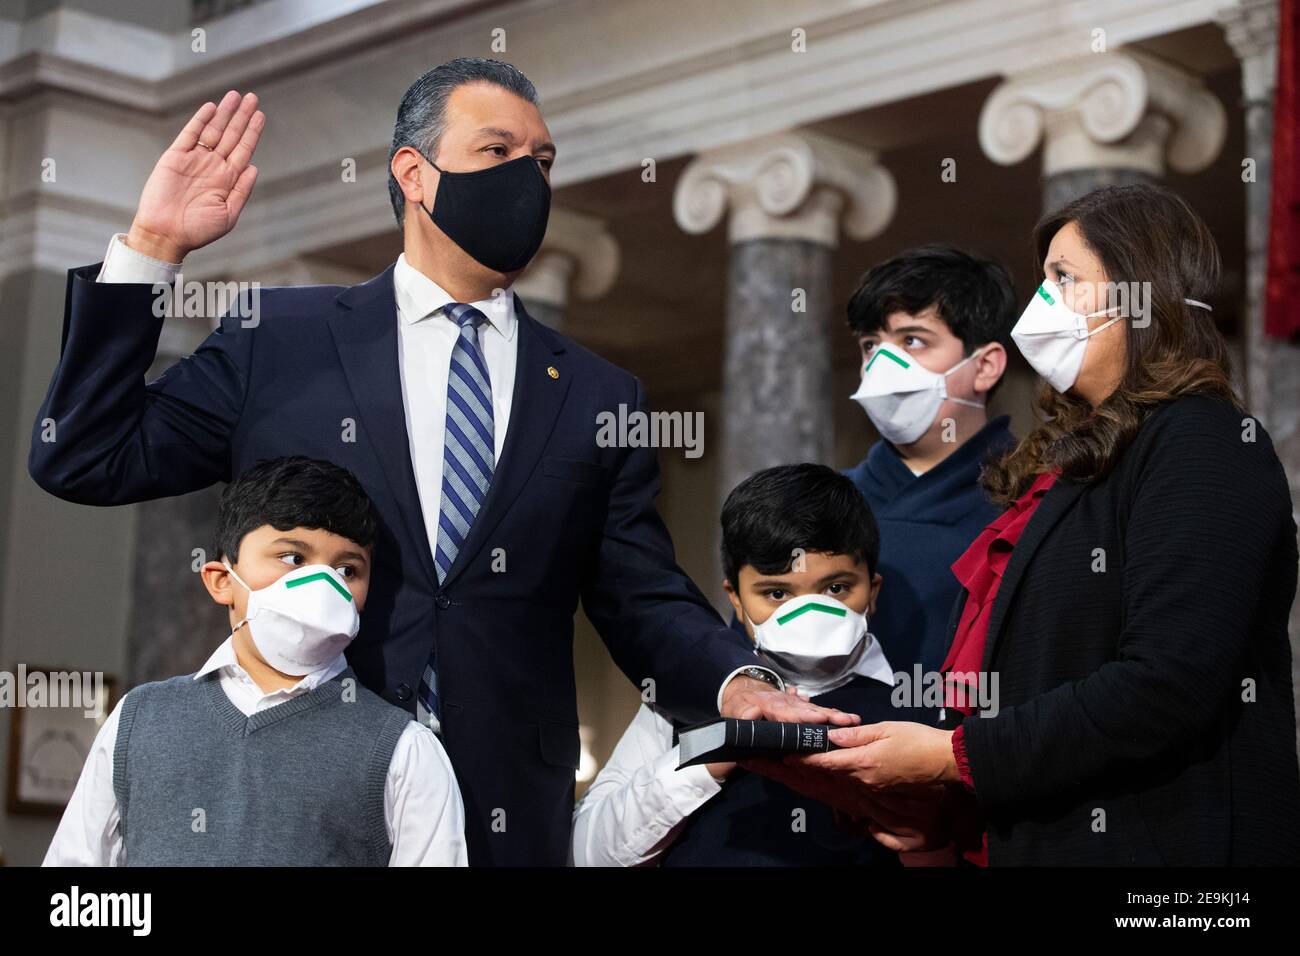 Democratic Senator from California Alex Padilla (Back L), participates in a ceremonial swearing-in with members of his family (L to R); son Diego Padilla (age 6), son Alex Padilla (age 7), son Roman Flores (age 13), and spouse Angela Padilla (R), in the Old Senate Chamber on Capitol Hill in Washington, DC, USA, 04 February 2021. (Photo by Pool/Sipa USA) Stock Photo